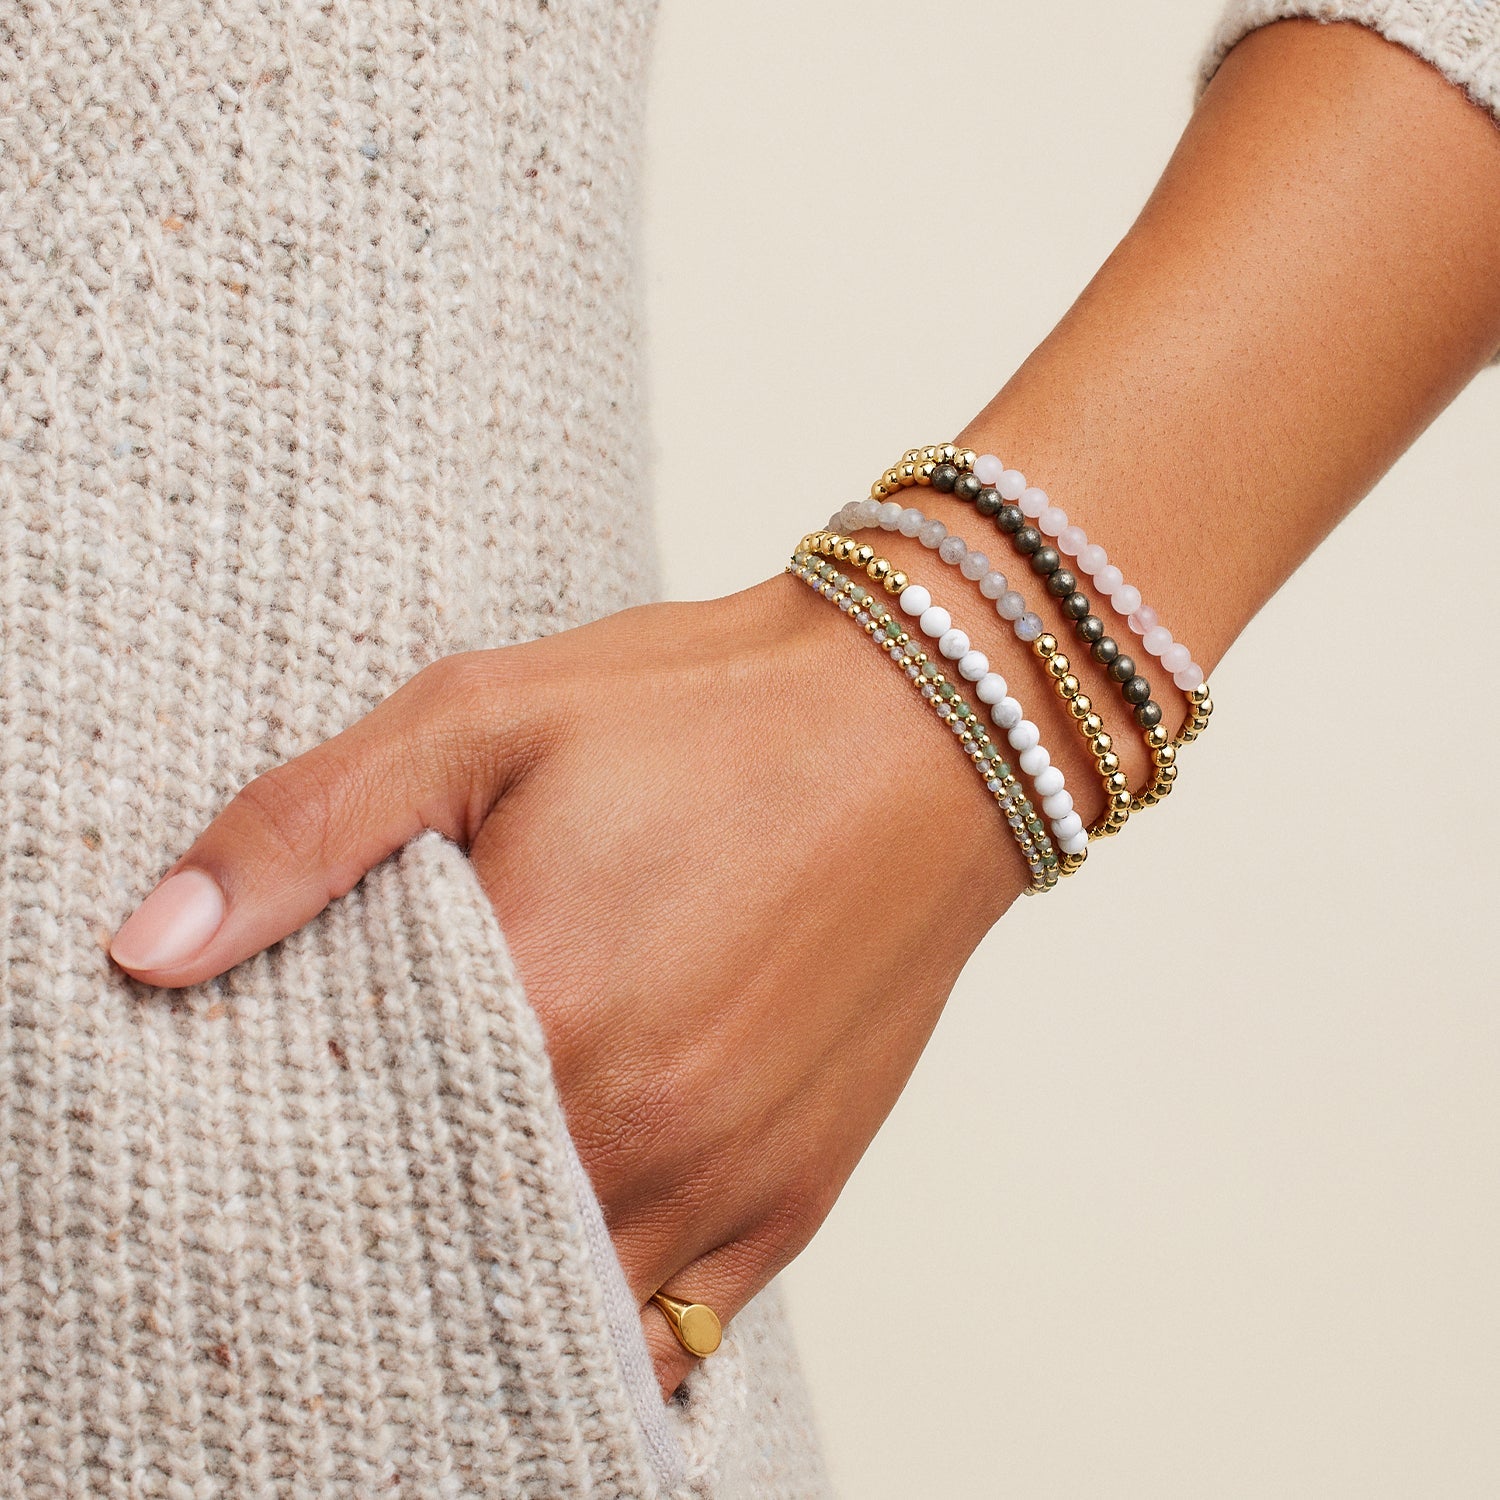 Buddha Power Bracelet: Embodies Strength and Resilience - Mantrapiece